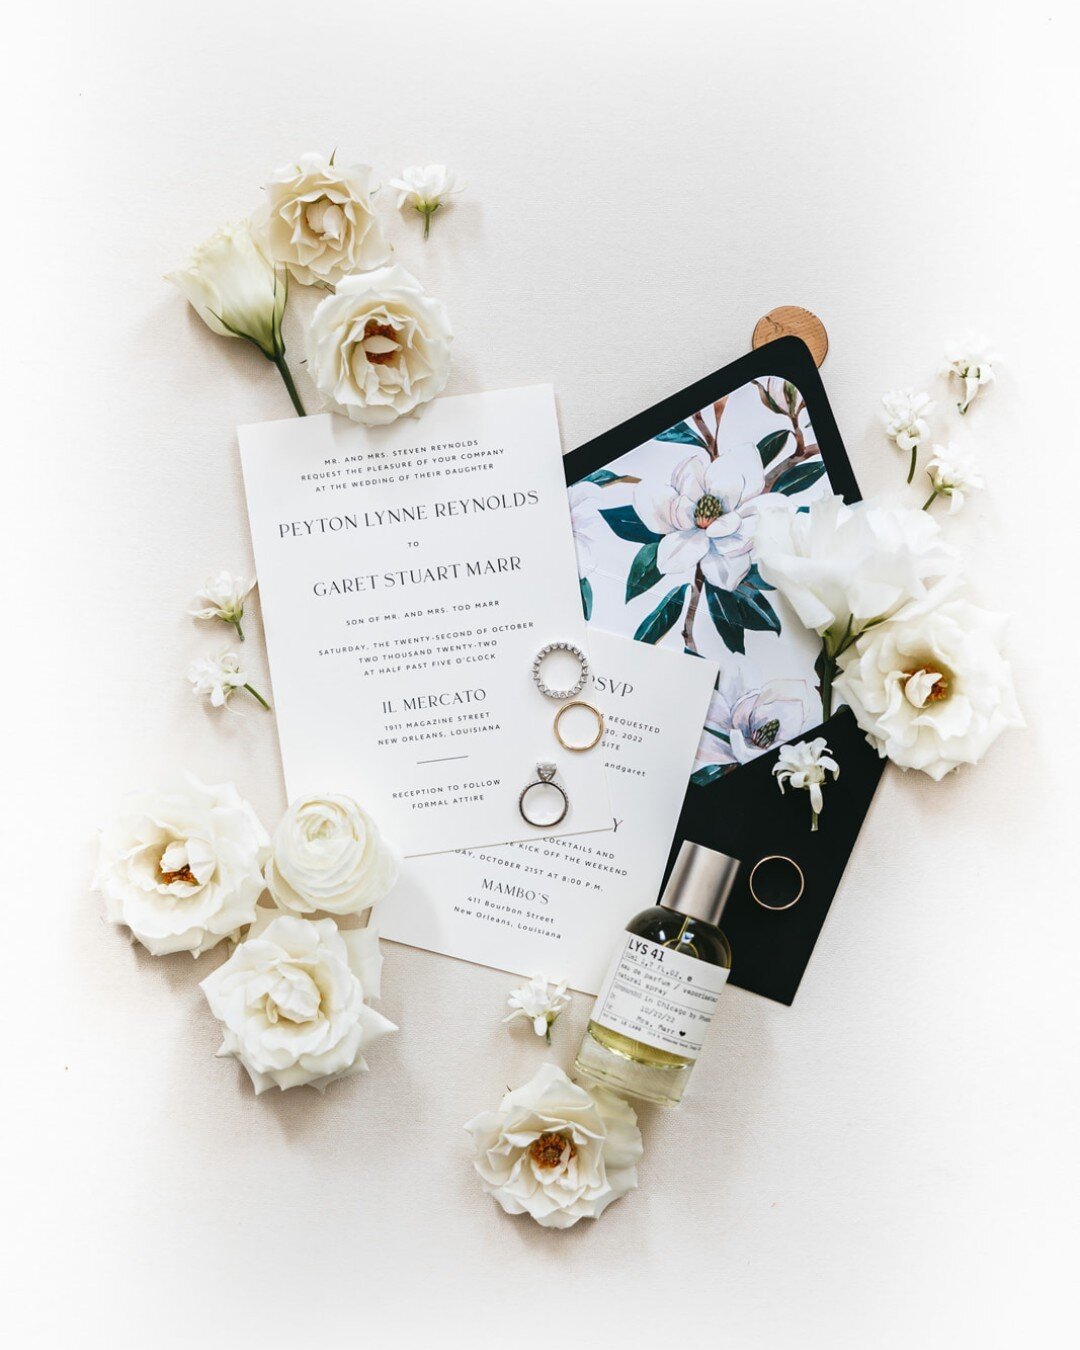 There are few things in the world that we love as much as a gorgeous wedding invitation suite.

Photographer: @ashlyncathey.photo
Planner: @amandapriceevents
Videographer: @valcinemaweddings
Florist: @antiguafloral
Stationer: @secondcitystationery
.
